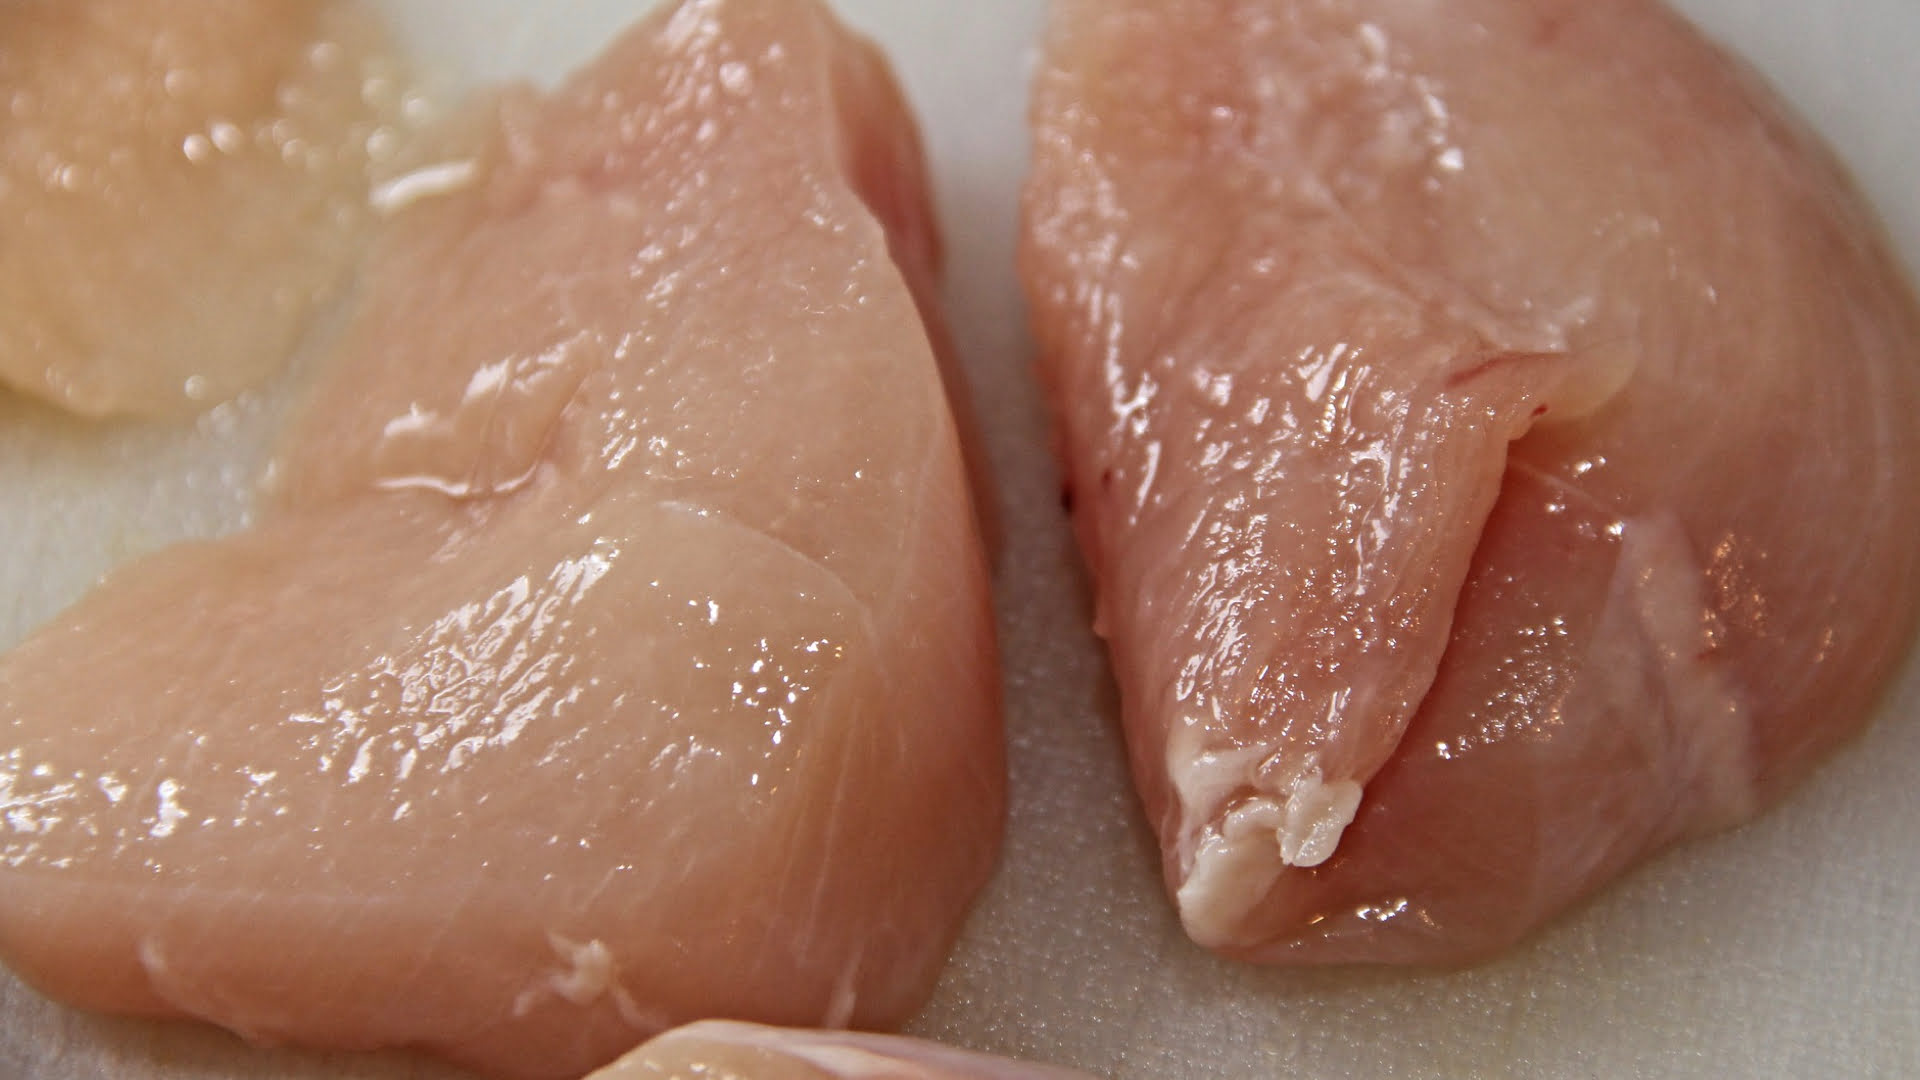 What Is The Type Of Contamination If Traces Of Pesticides Are Found On Raw Poultry Breast?